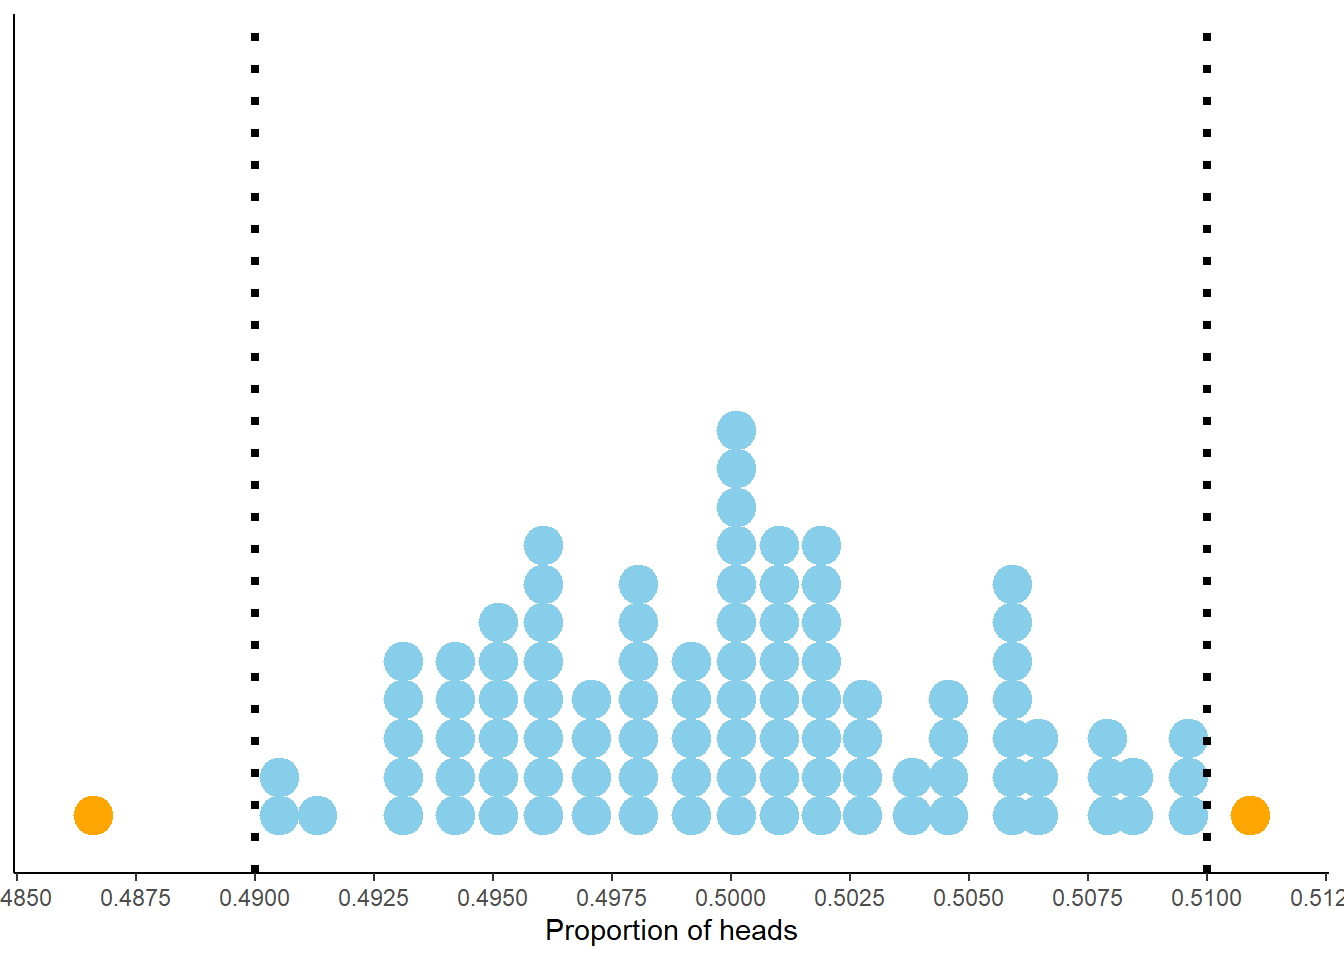 Proportion of flips which are heads in 100 sets of 10,000 fair coin flips. Each dot represents a set of 10,000 fair coin flips. In 98 of these 100 sets the proportion of heads is between 0.49 and 0.51 (the blue dots).